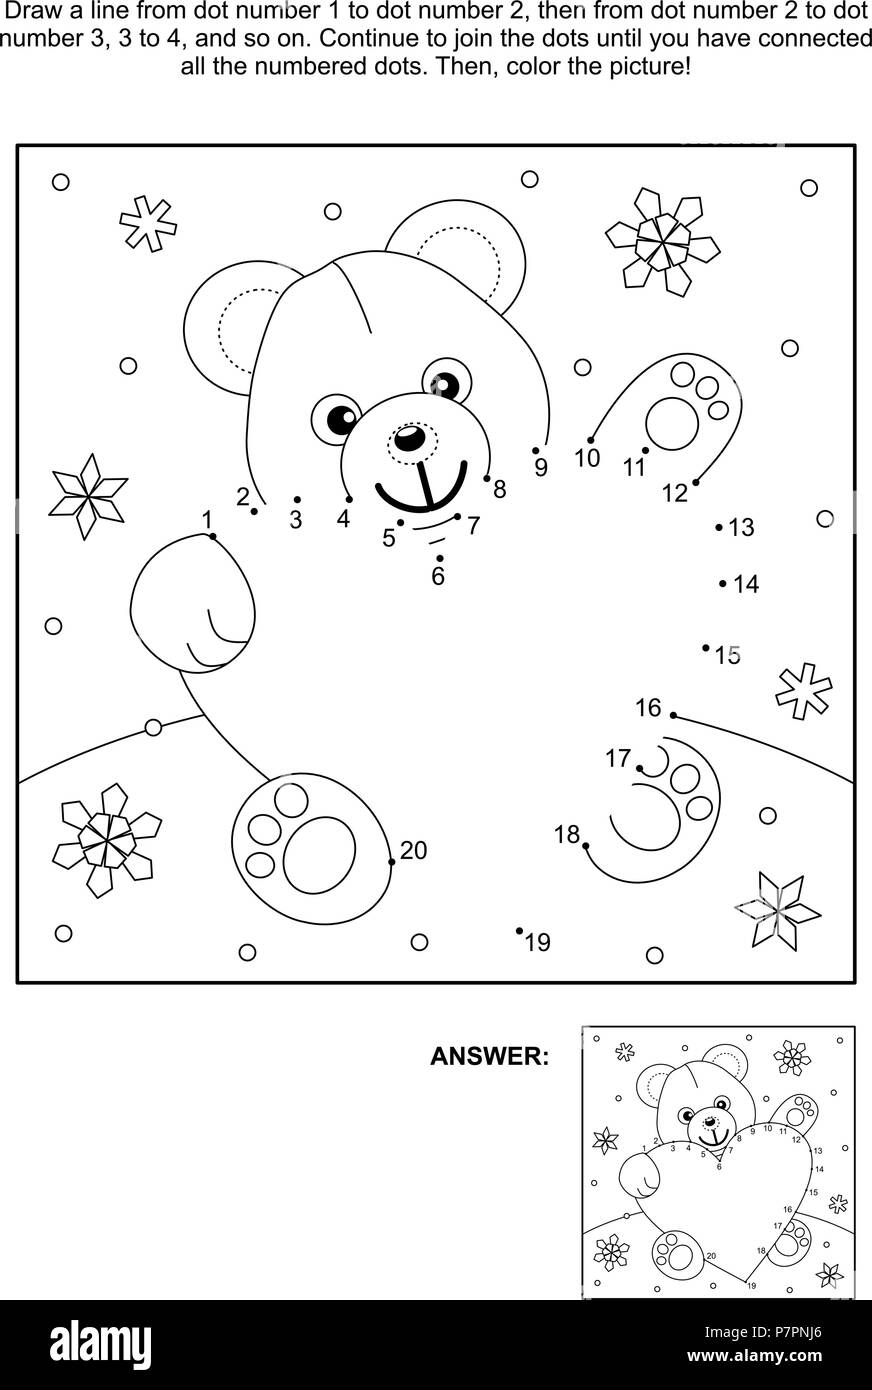 Valentines day themed connect the dots picture puzzle and coloring page with teddy bear and heart answer included stock vector image art